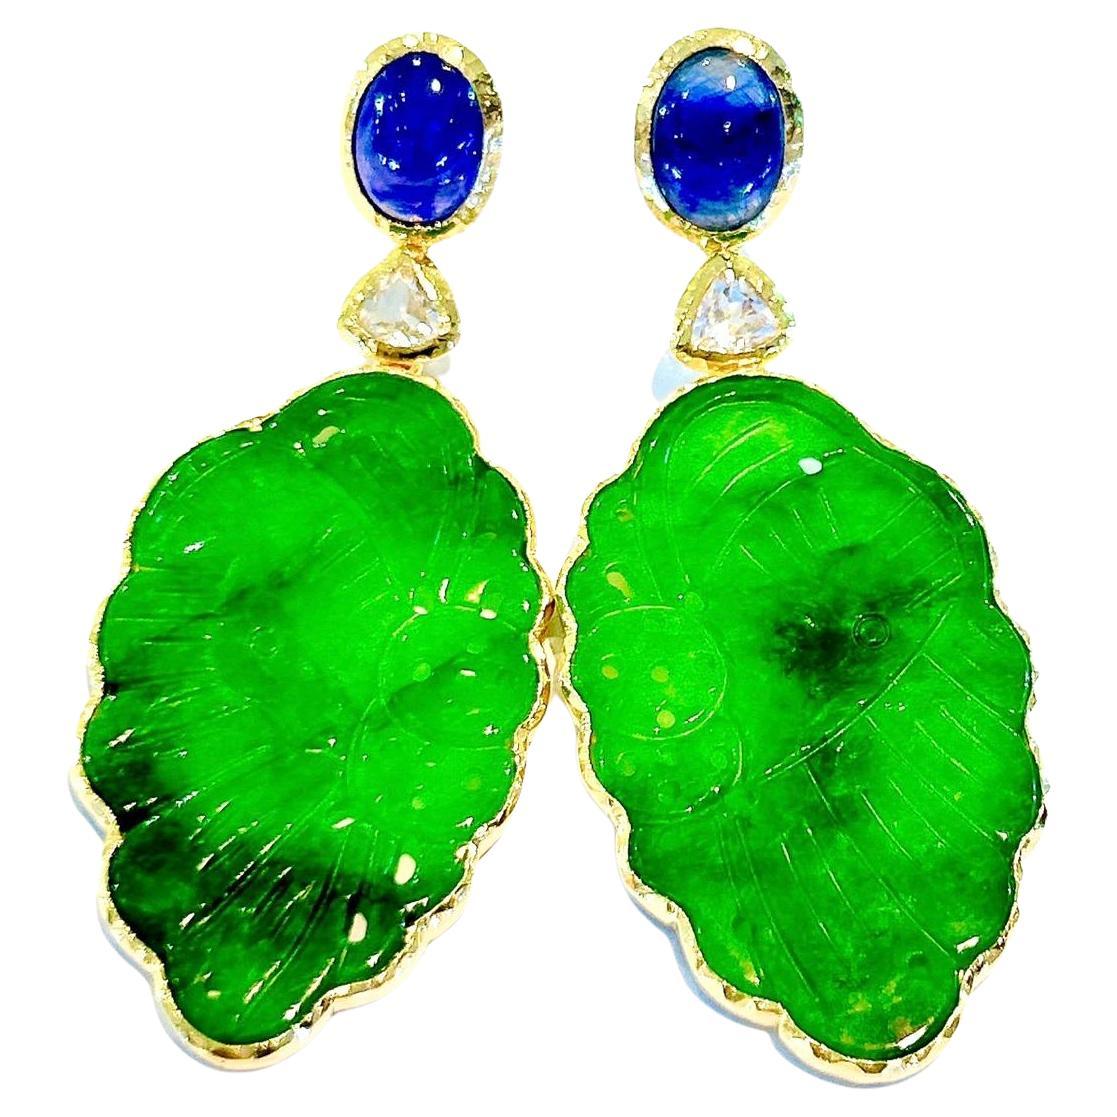 Bochic “Orient” Jade & Sapphire Earrings set in 22K Gold & Silver 
Green Carved Jade  - 30 carats in total
Natural Deep Blue Sri Lankan Sapphires 
Shape - Cabochon
14 Carats 
Natural White Topaz - 5 carats in total 
Shape - Trillion
Set in 22K Gold